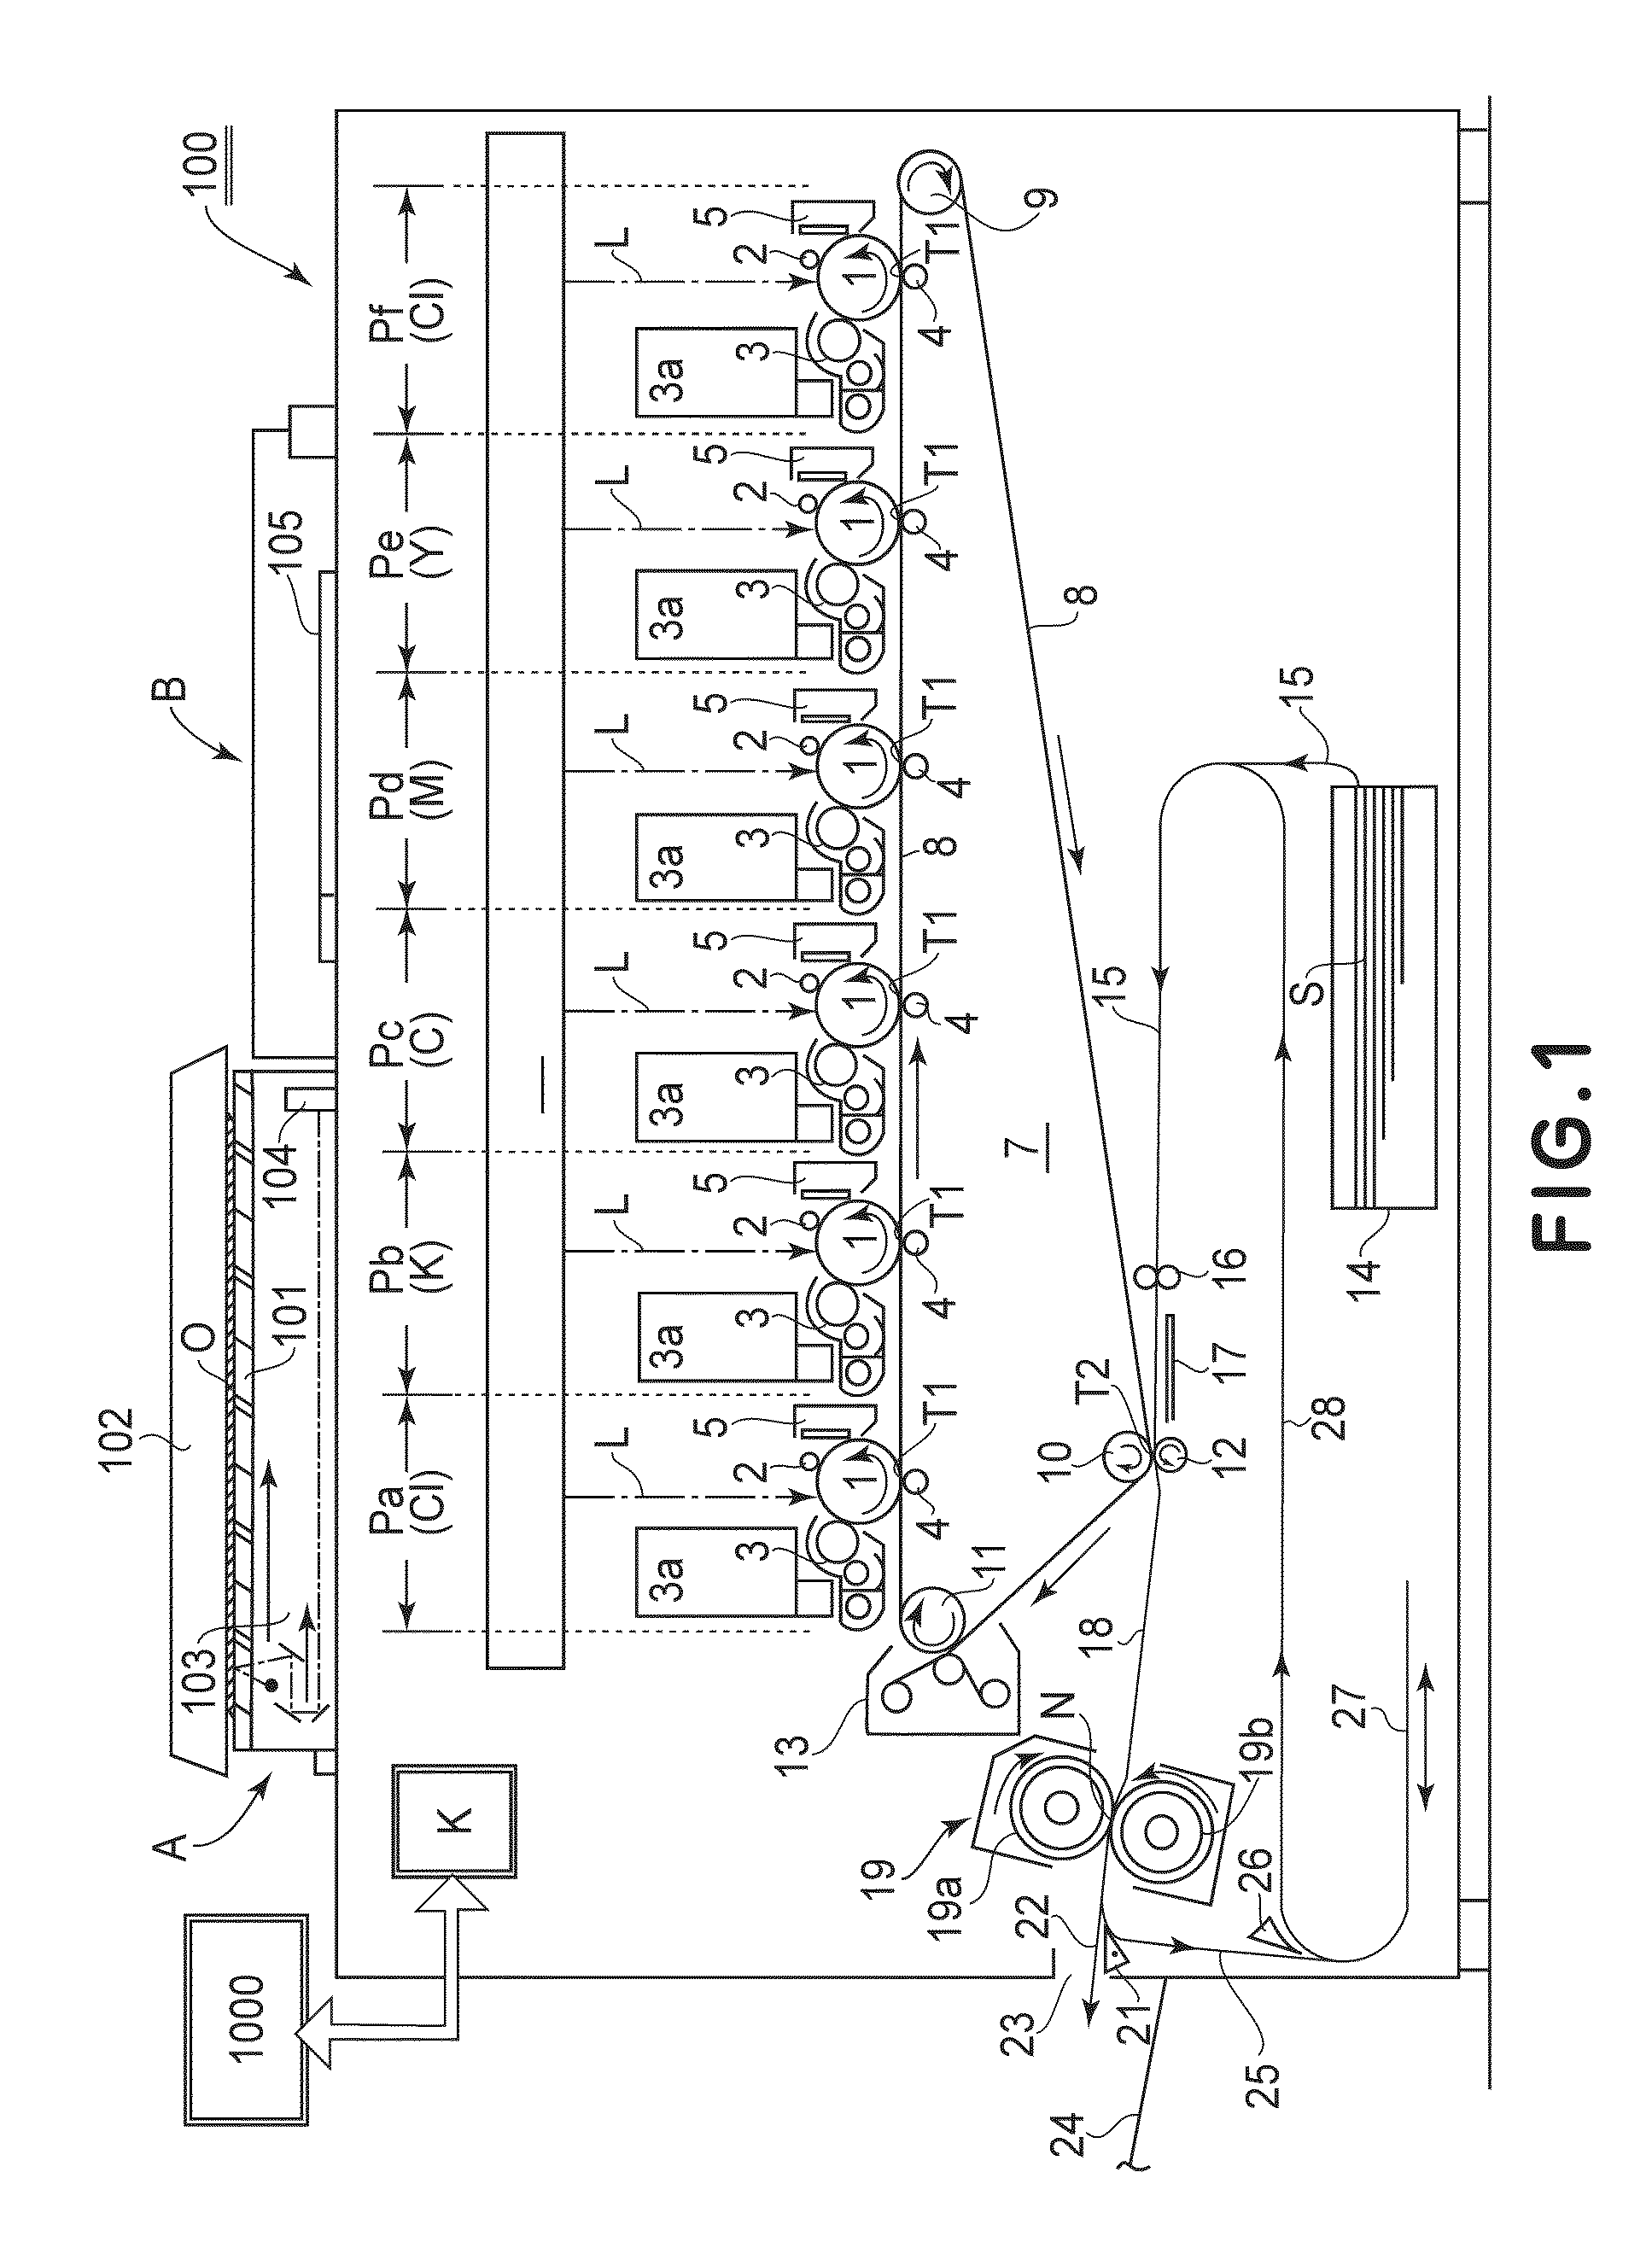 Image forming apparatus including an image area glossiness control feature